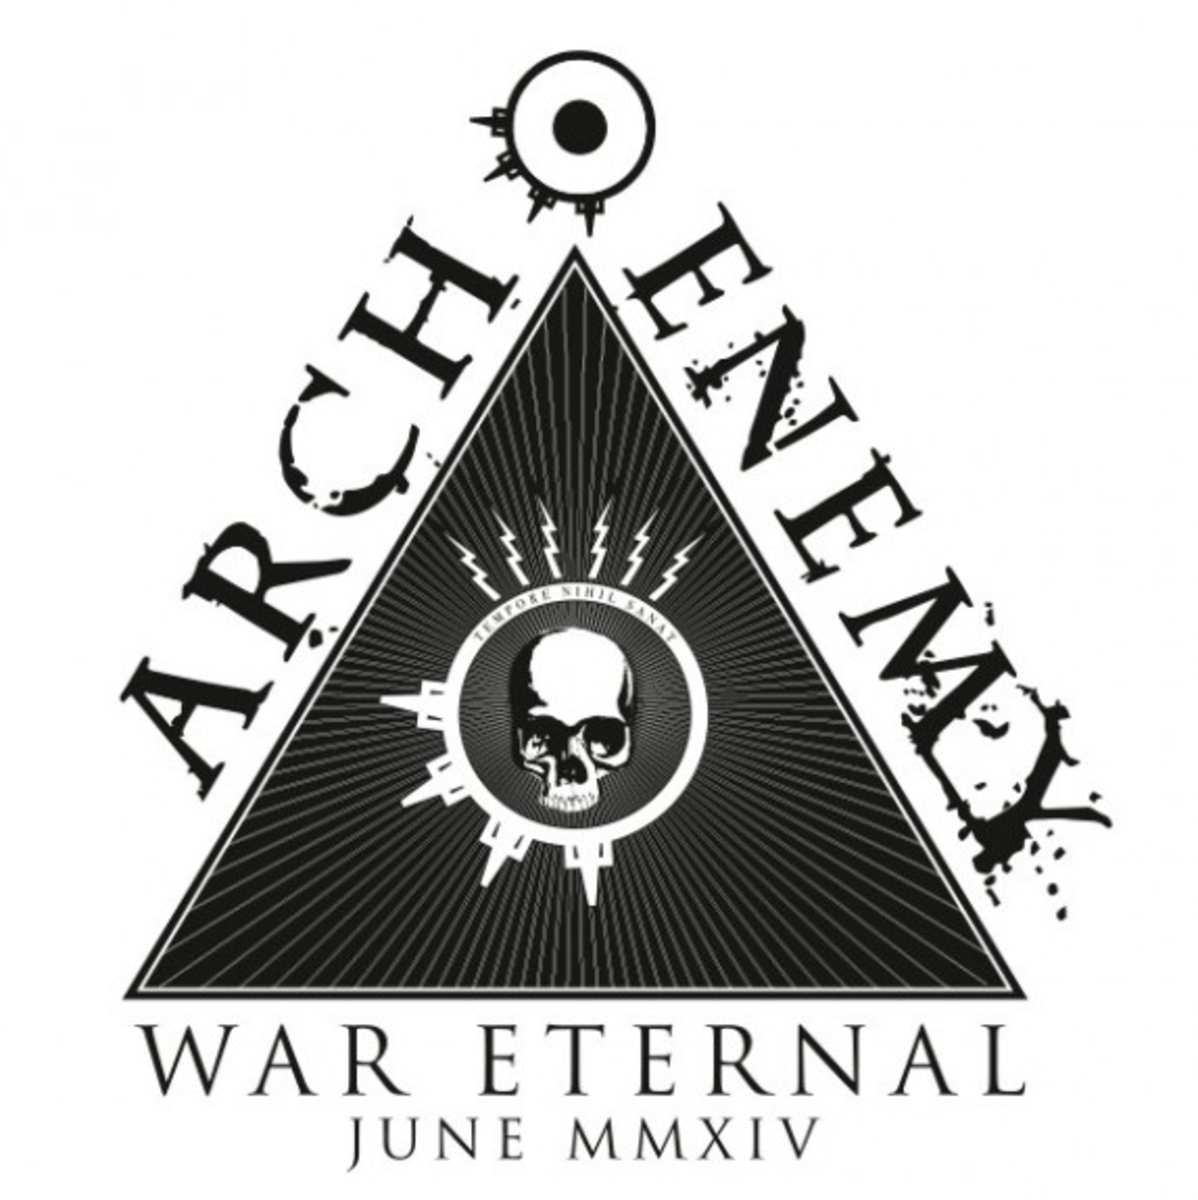 Arch Enemy image